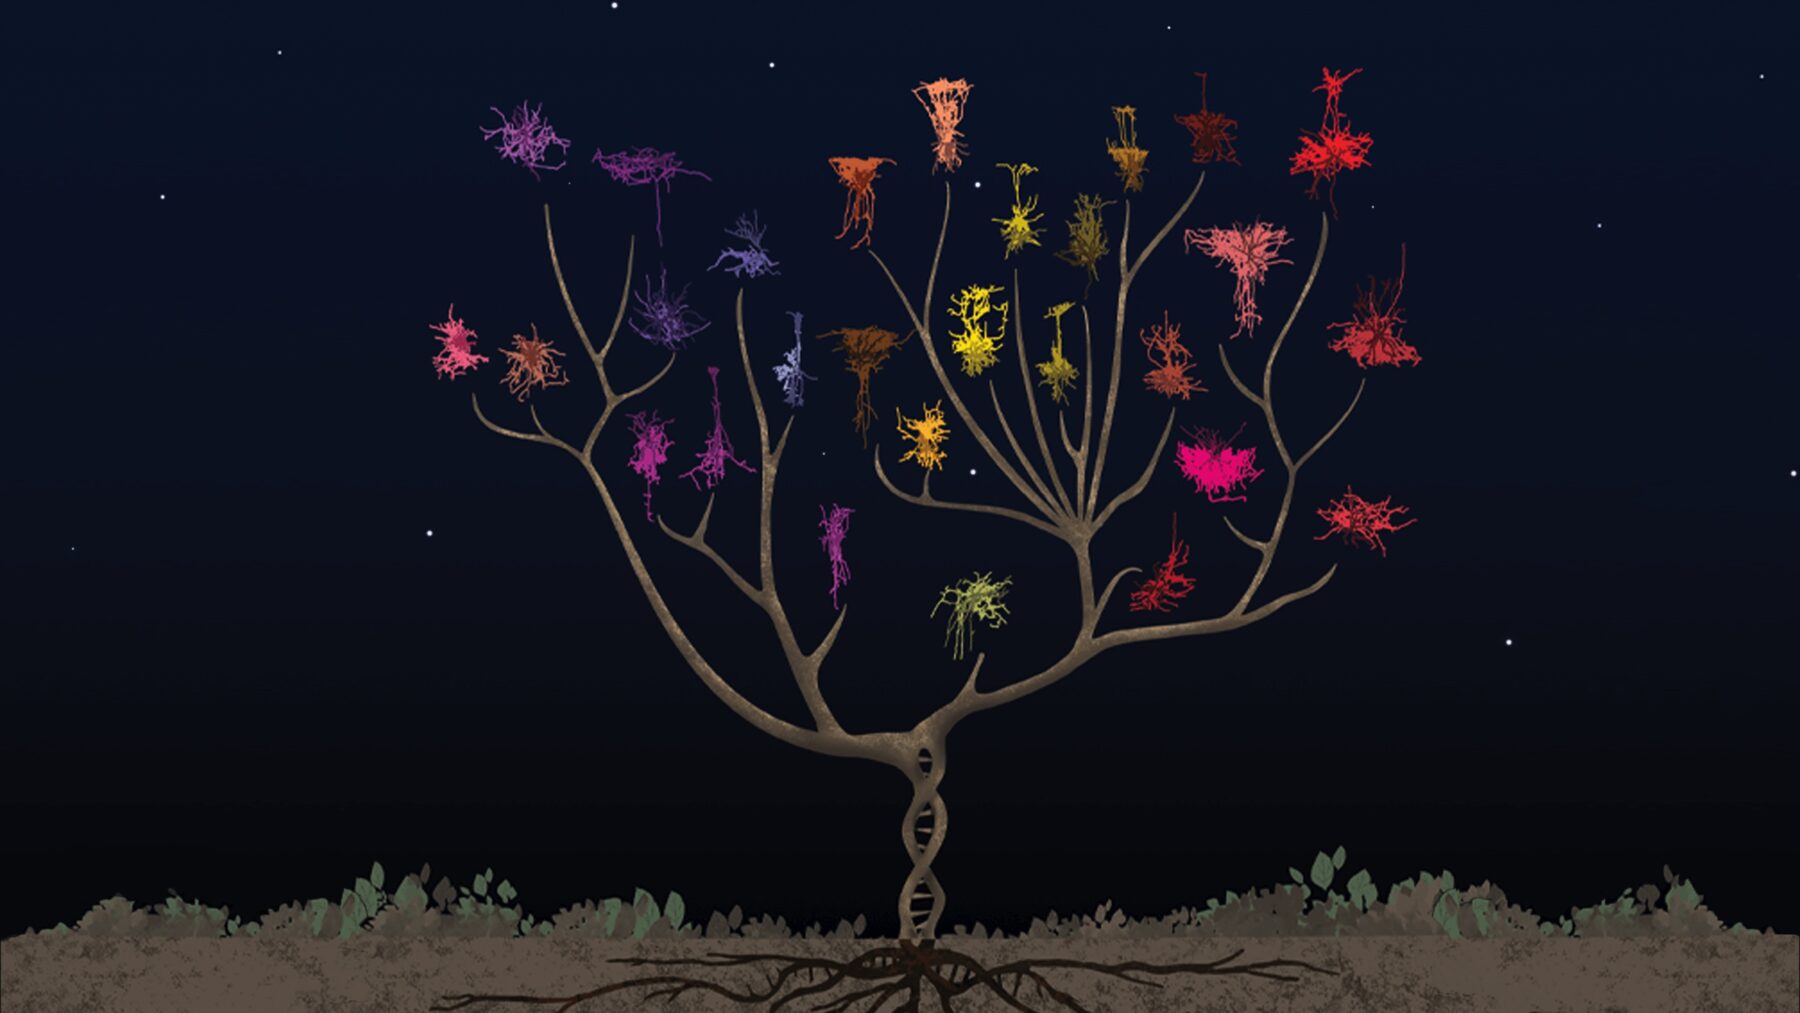 A technique that captures information about a neuron's 3D shape, electrical properties, and its genes is giving scientists a new way to look at cell types in the mouse brain and the relationship between them — described in this illustration as a 'family tree' of neurons. Illustration by Benedicte Rossi.